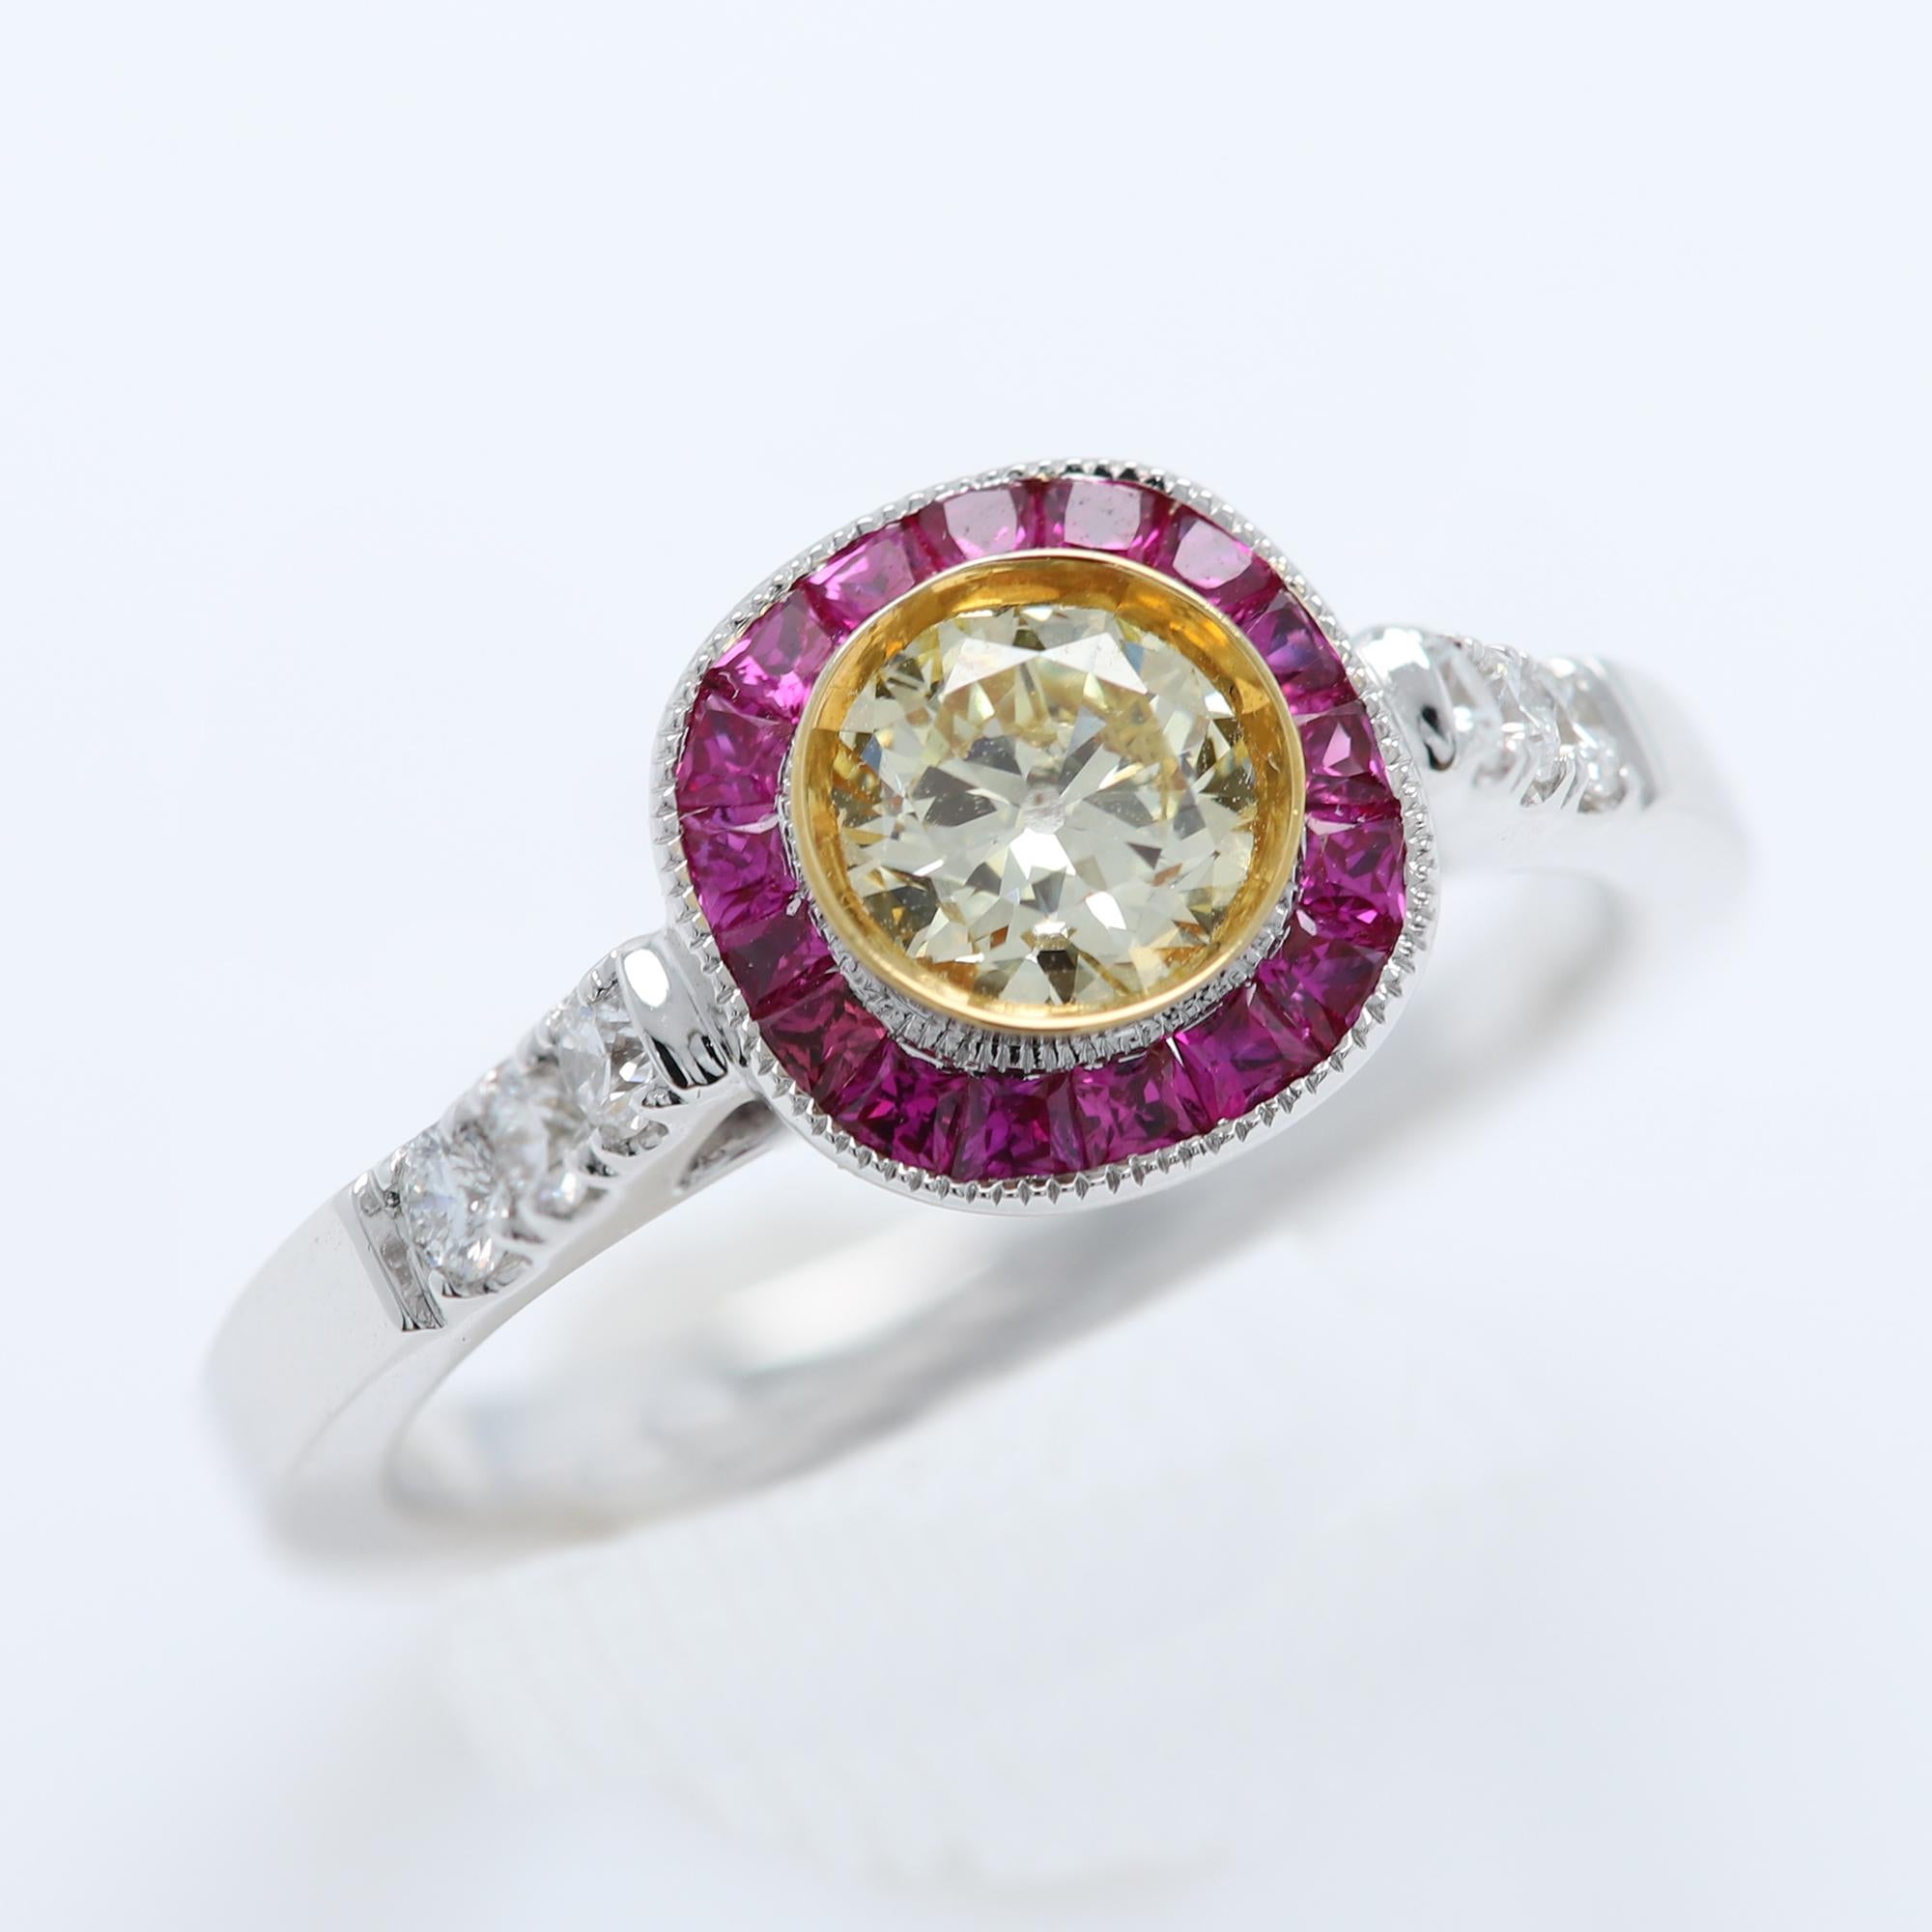 Art Deco Style Colorful Ring
Center is Light Yellow Diamond surrounded with Red Ruby, sides have regular white Diamonds
All stones are Natural
18k Two Tone Gold 
Yellow Diamond size - 0.69 carat Round Shape (6mm) Light Yellow-SI
Small Diamonds 0.36